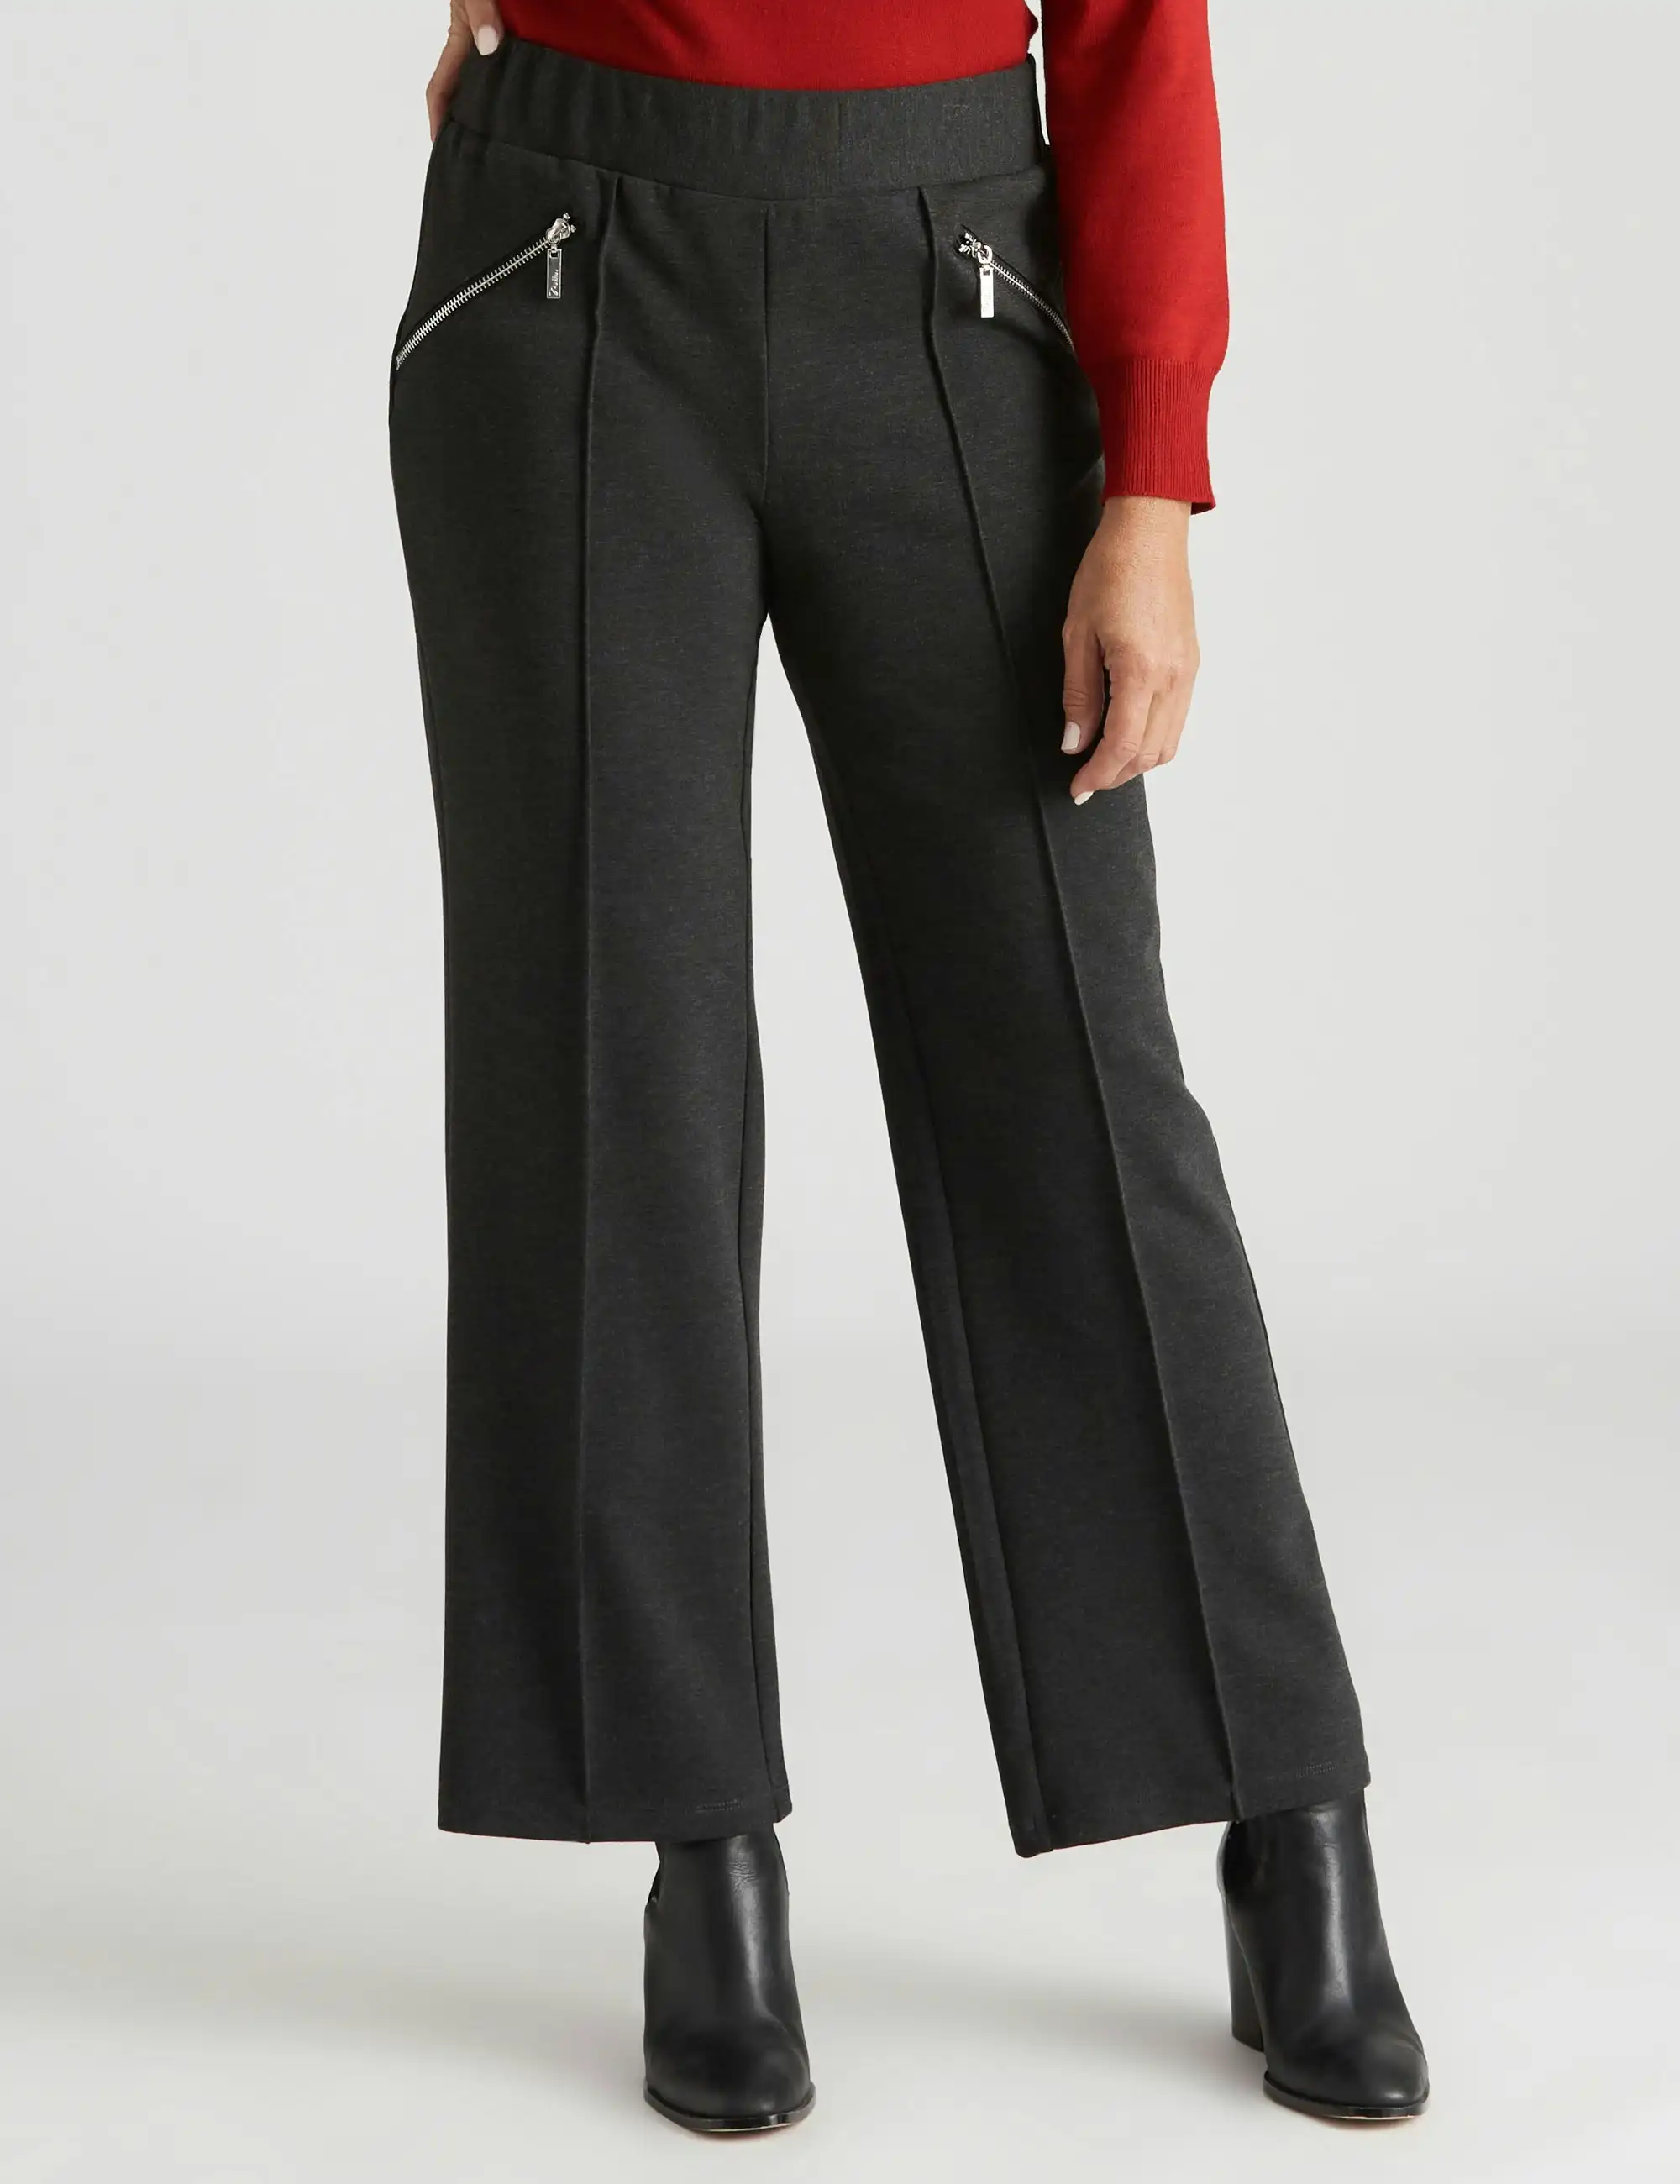 Millers Full Length Wide Leggs Pannelled Ponte Zipped Pants (Charcoal Marl)